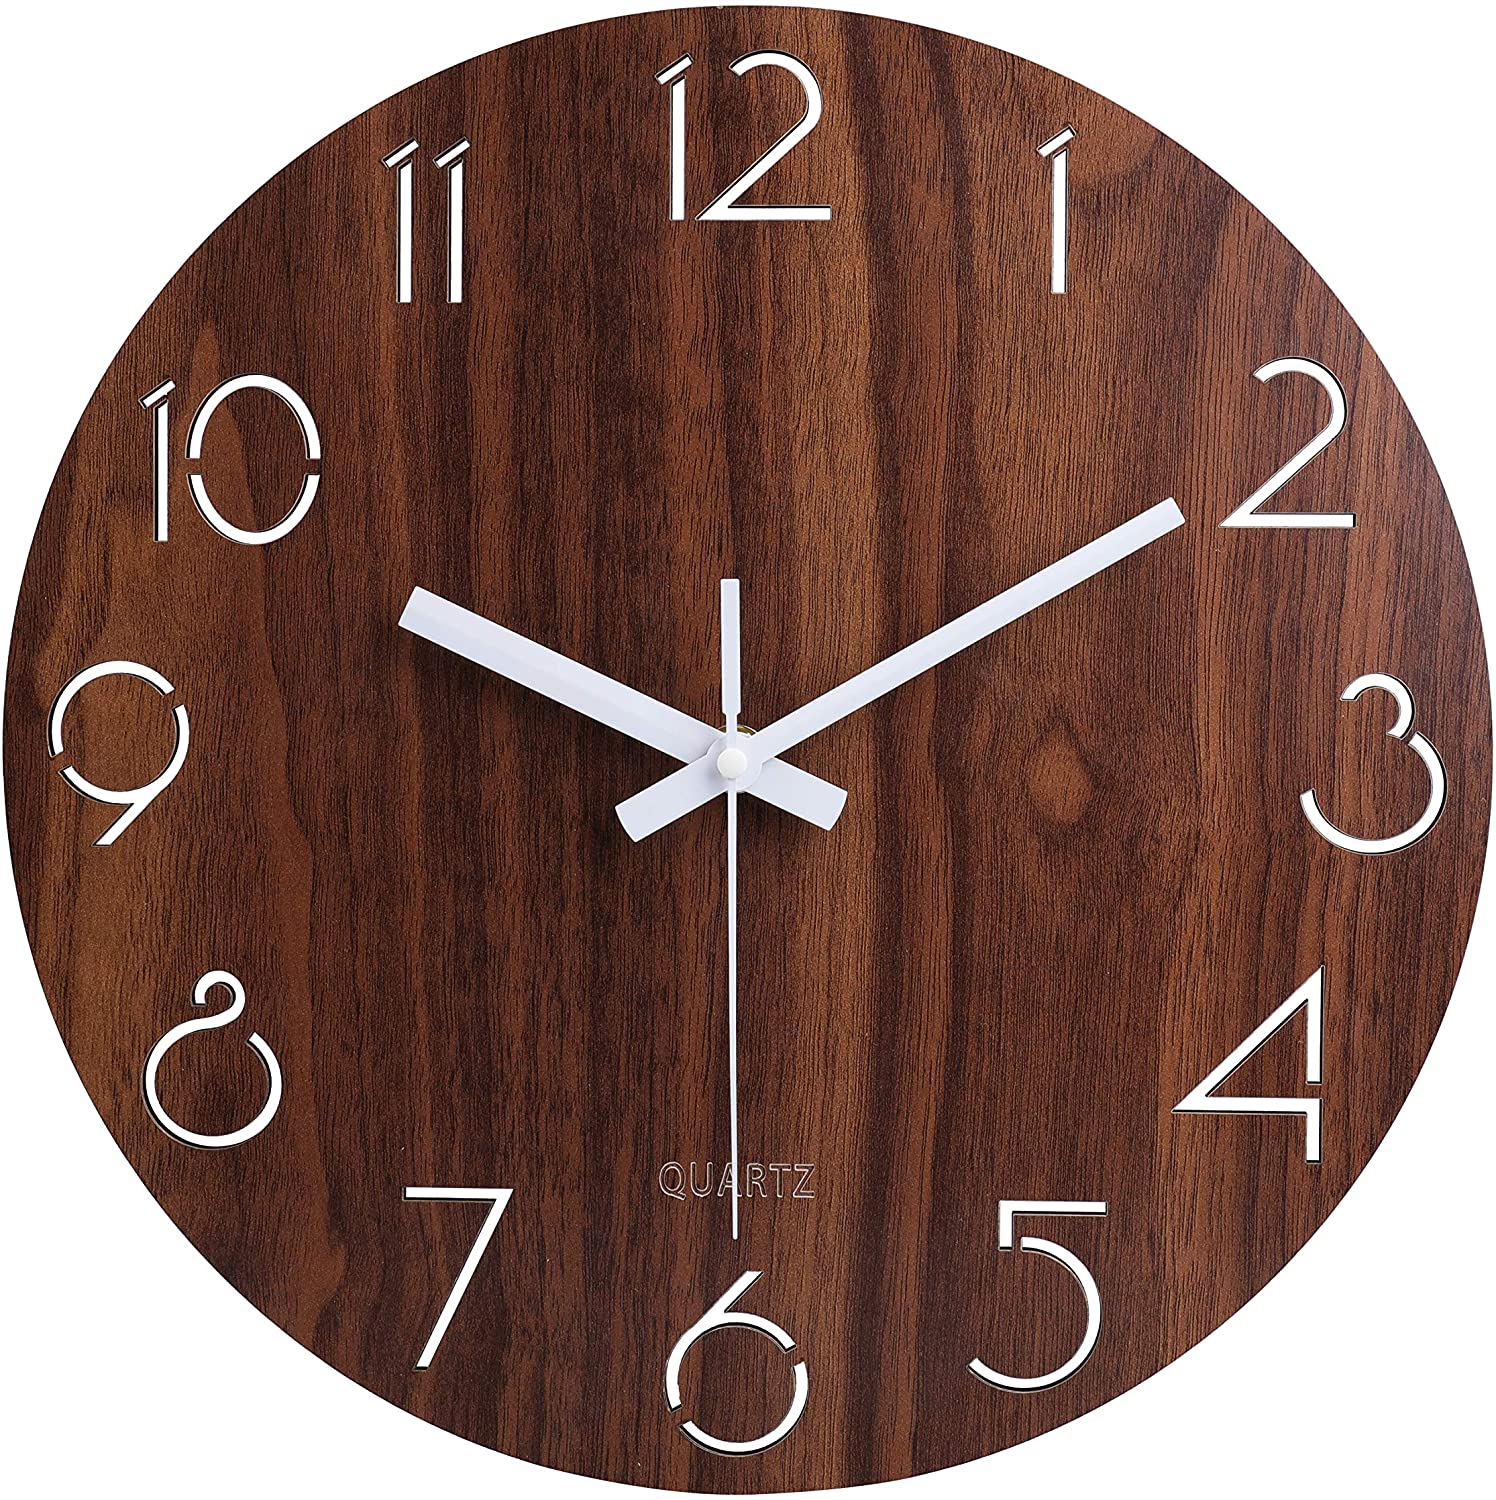 3014-12IN-Brown-Hollow 12" Vintage Arabic Numeral Design Rustic Country Tuscan Style Wooden Decorative Round Wall Clock